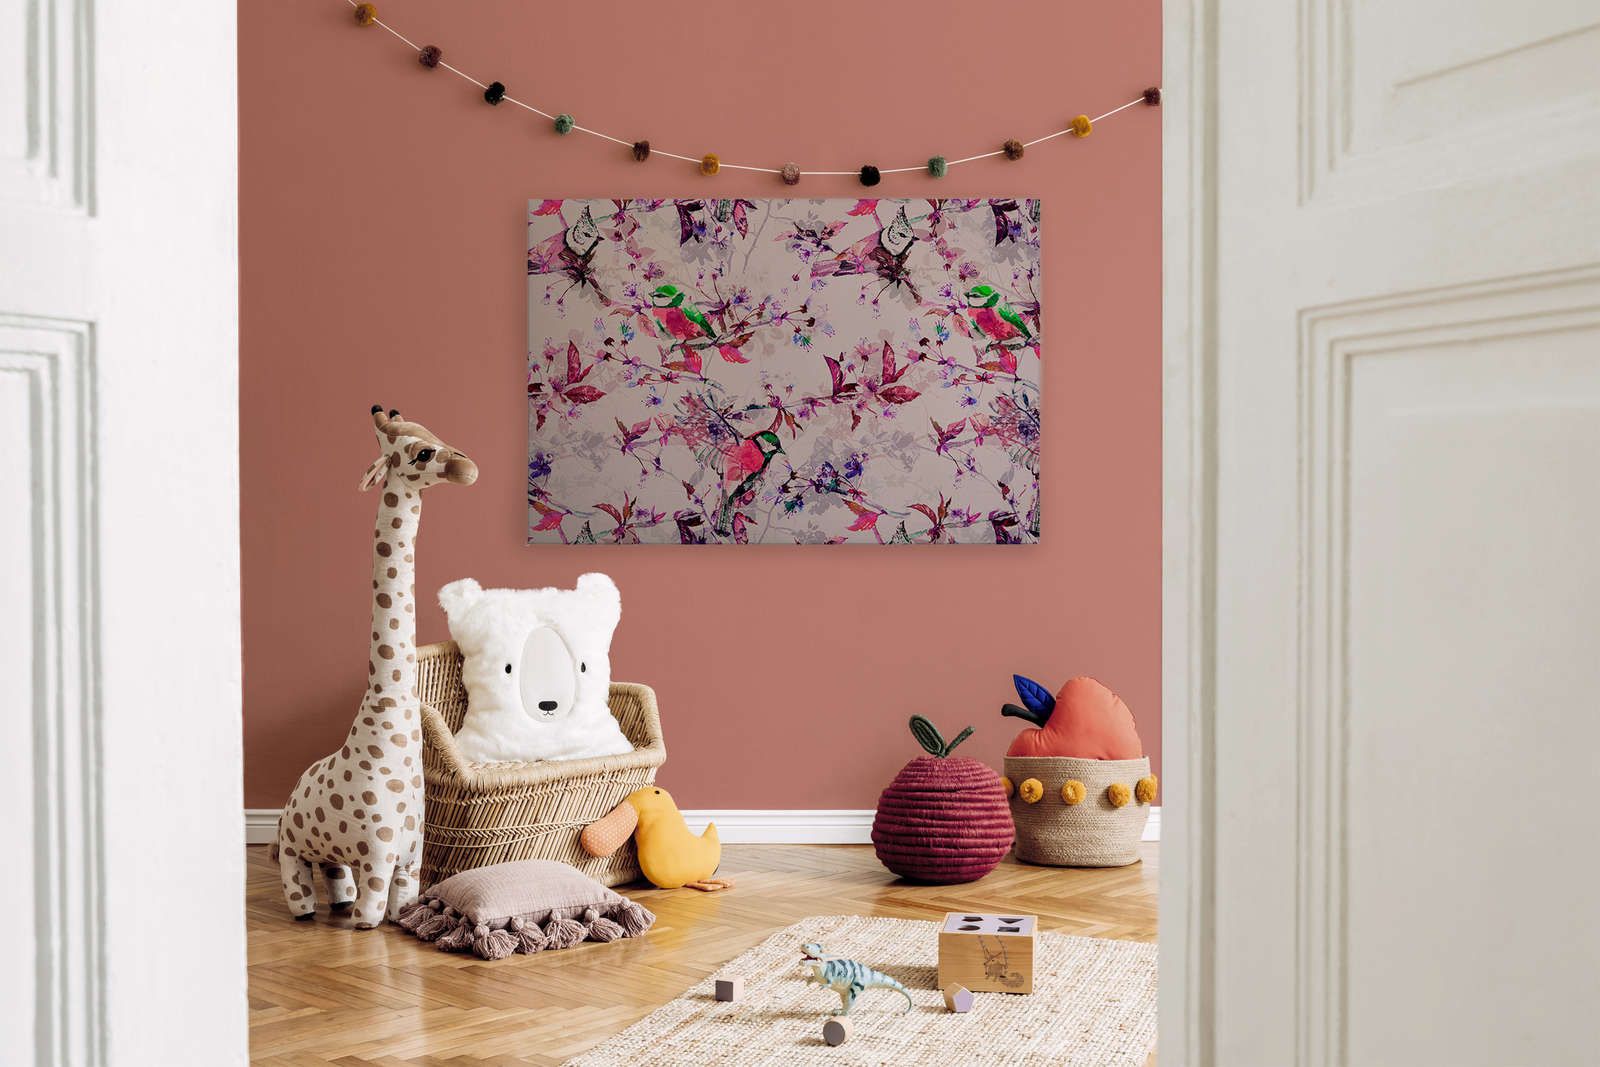             Birds Collage Style Canvas Painting | pink, blue - 1.20 m x 0.80 m
        